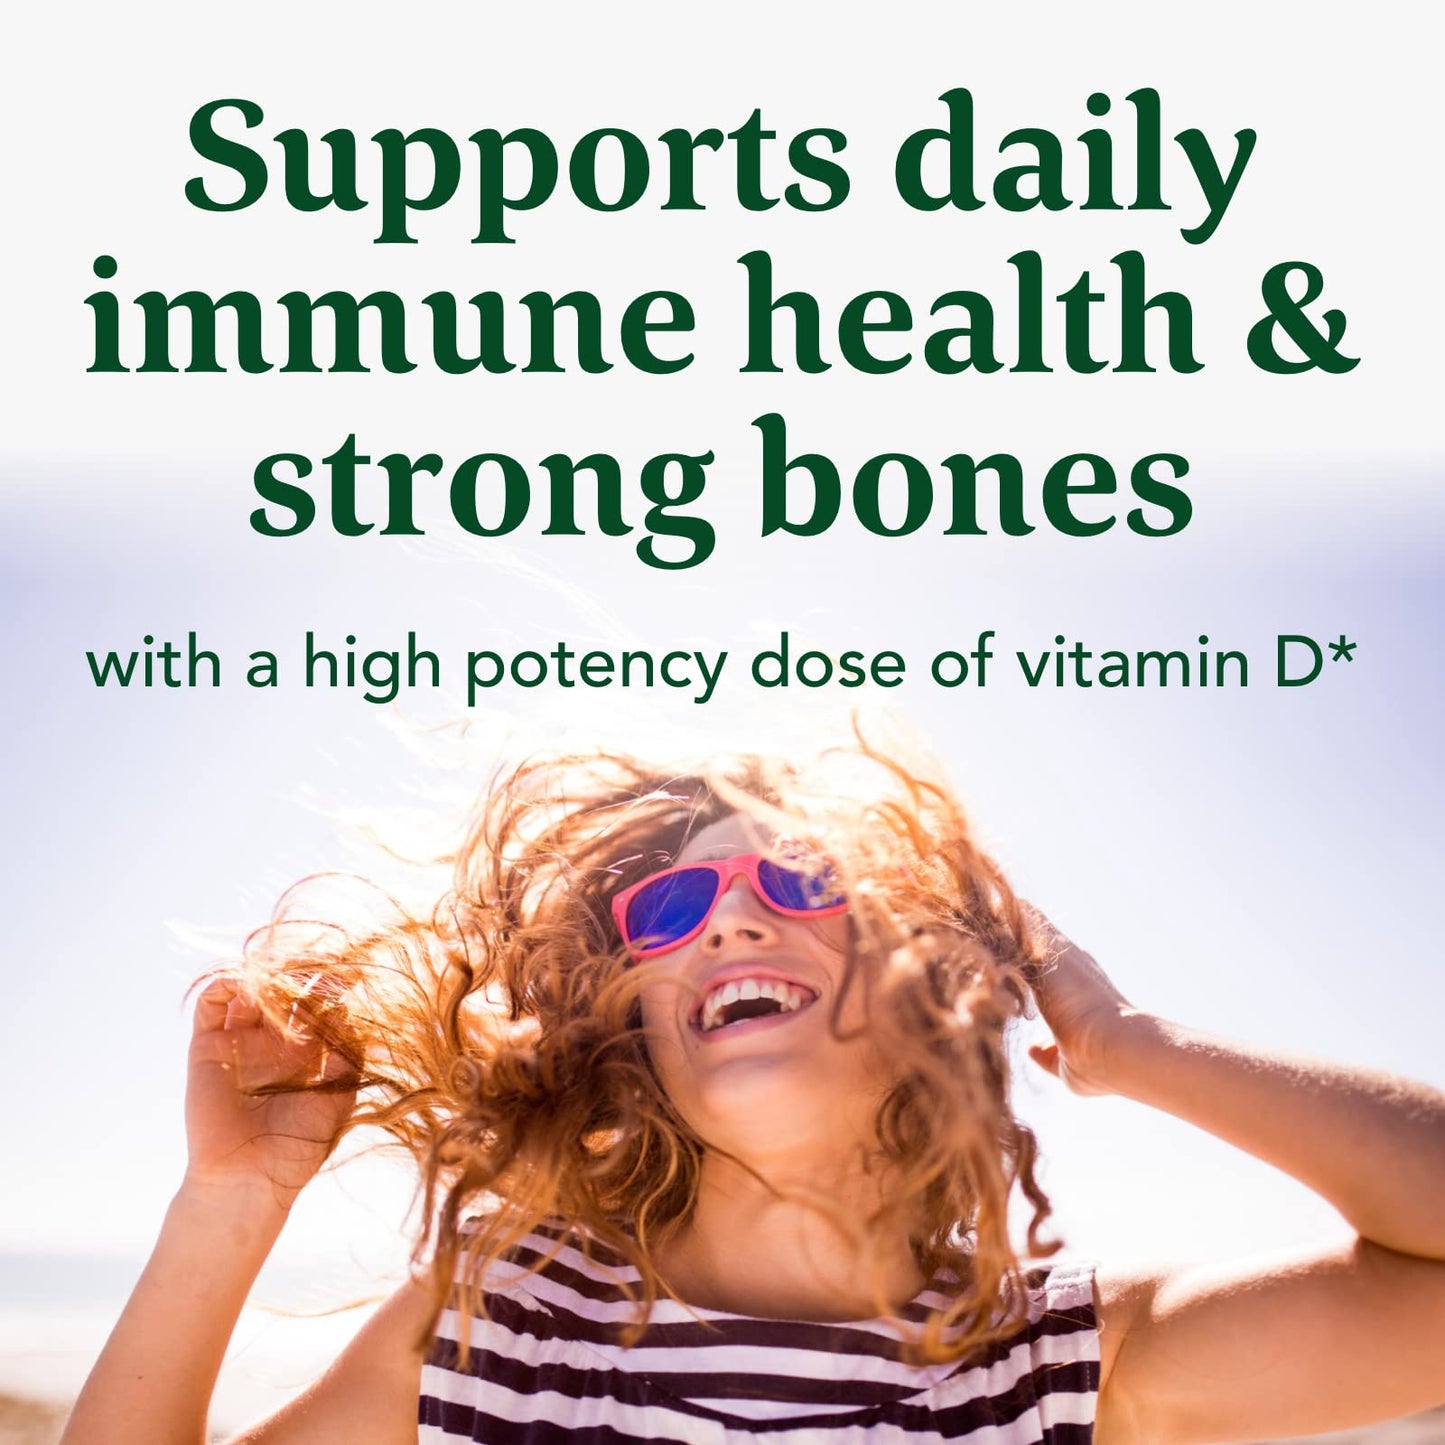 MegaFood Vitamin D3 5000 IU (125 mcg) - Immune Support Supplement - Bone Health - with Vitamin D3, Vitamin K, and Vitamin K2 - Vegetarian, Gluten-Free - Made Without 9 Food Allergens - 120 Caps